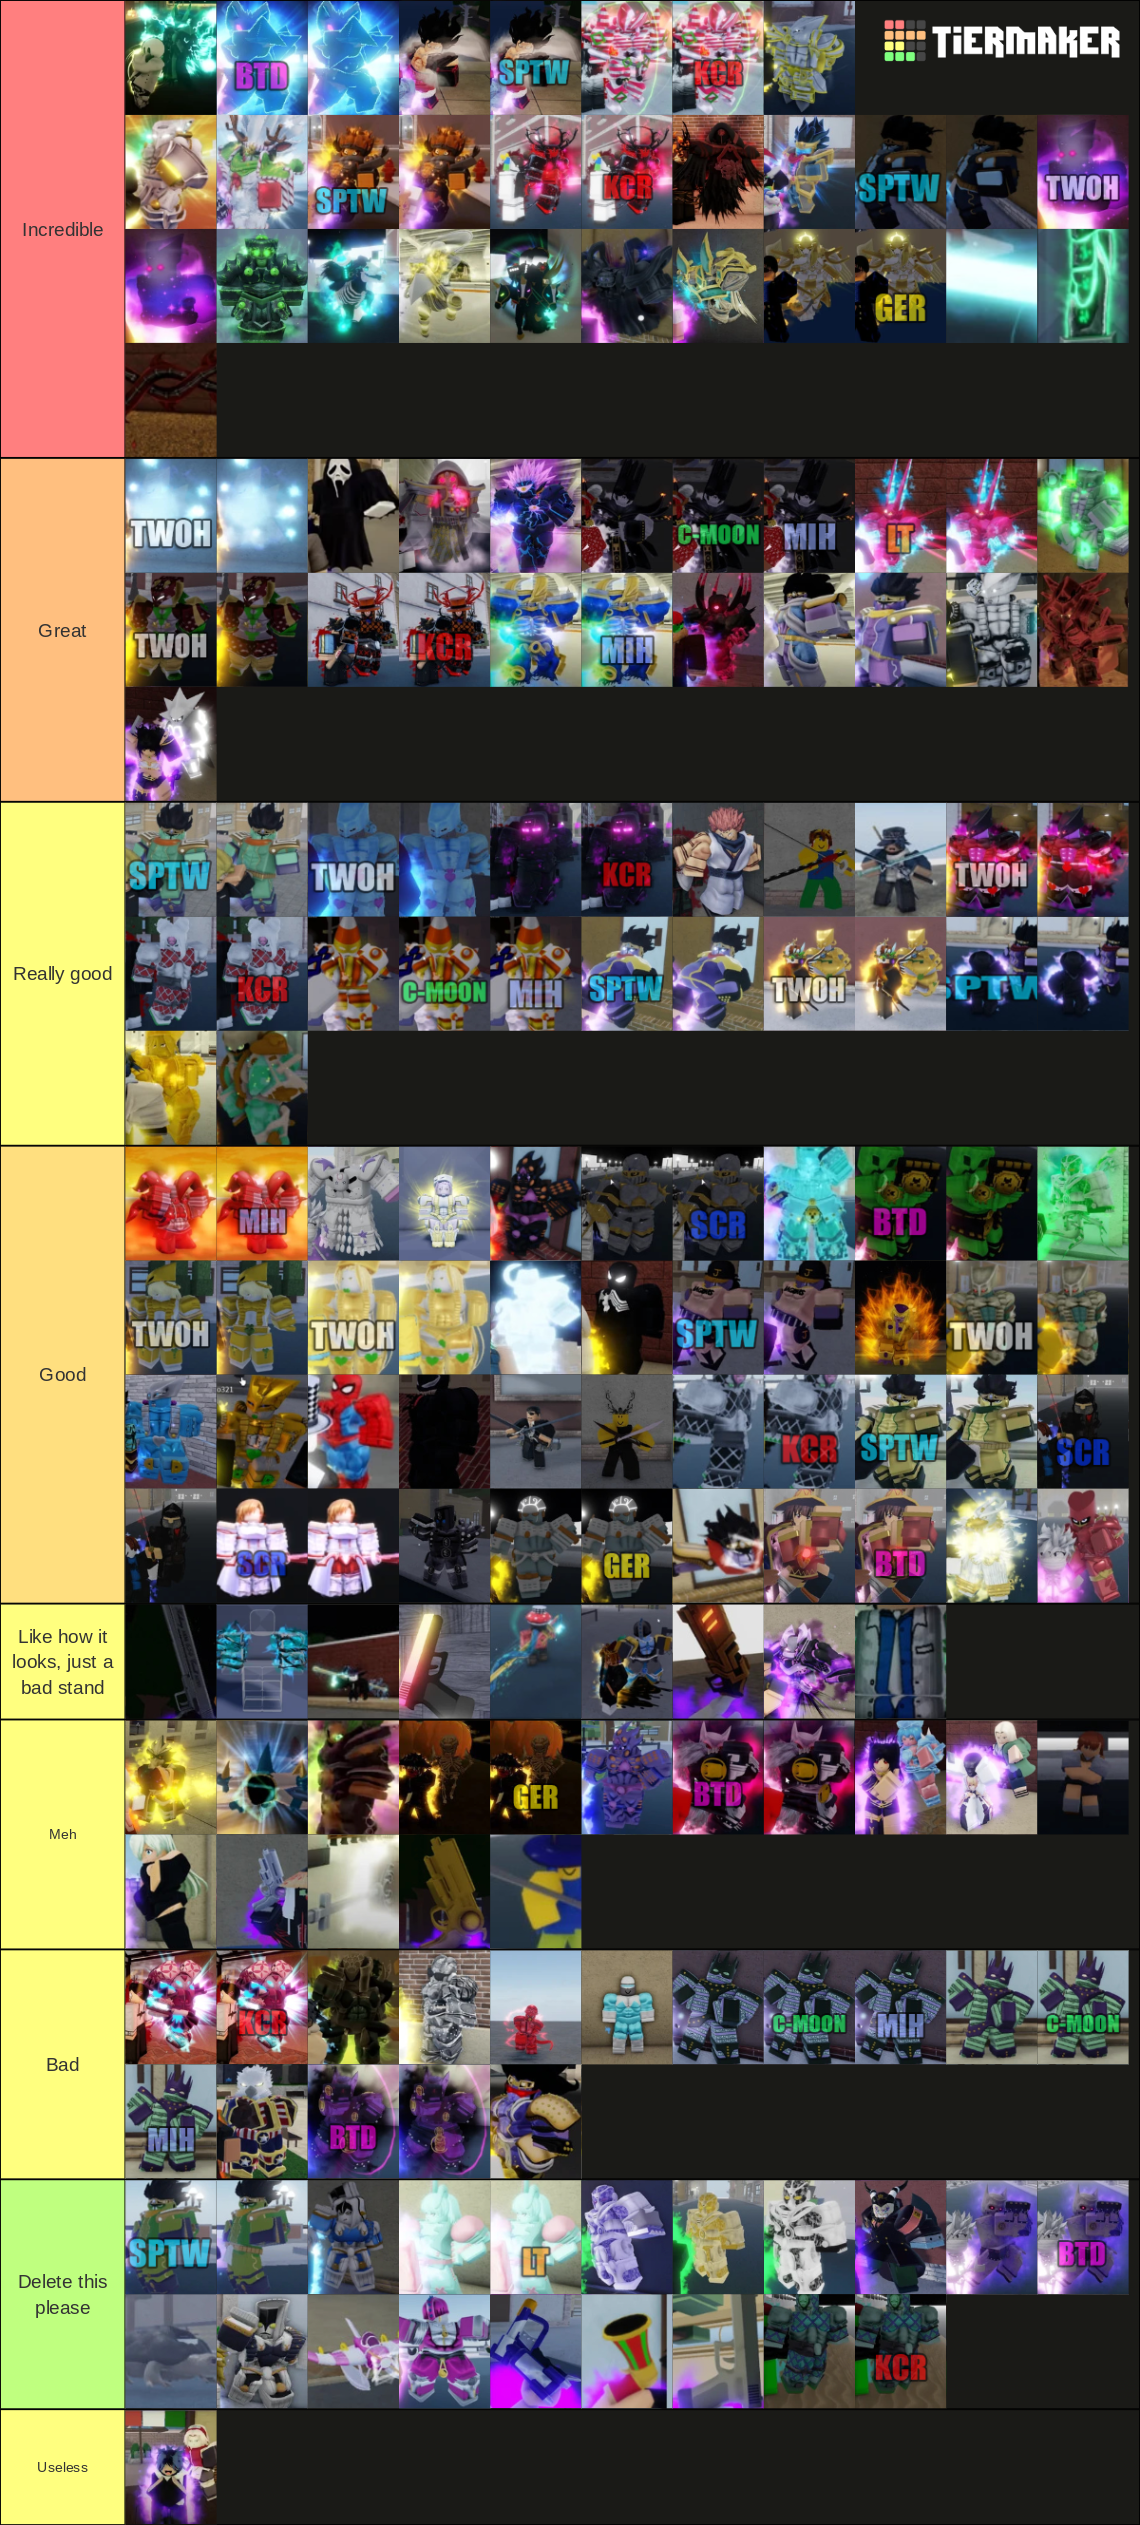 Create a YBA stand skins 2 Tier List - TierMaker